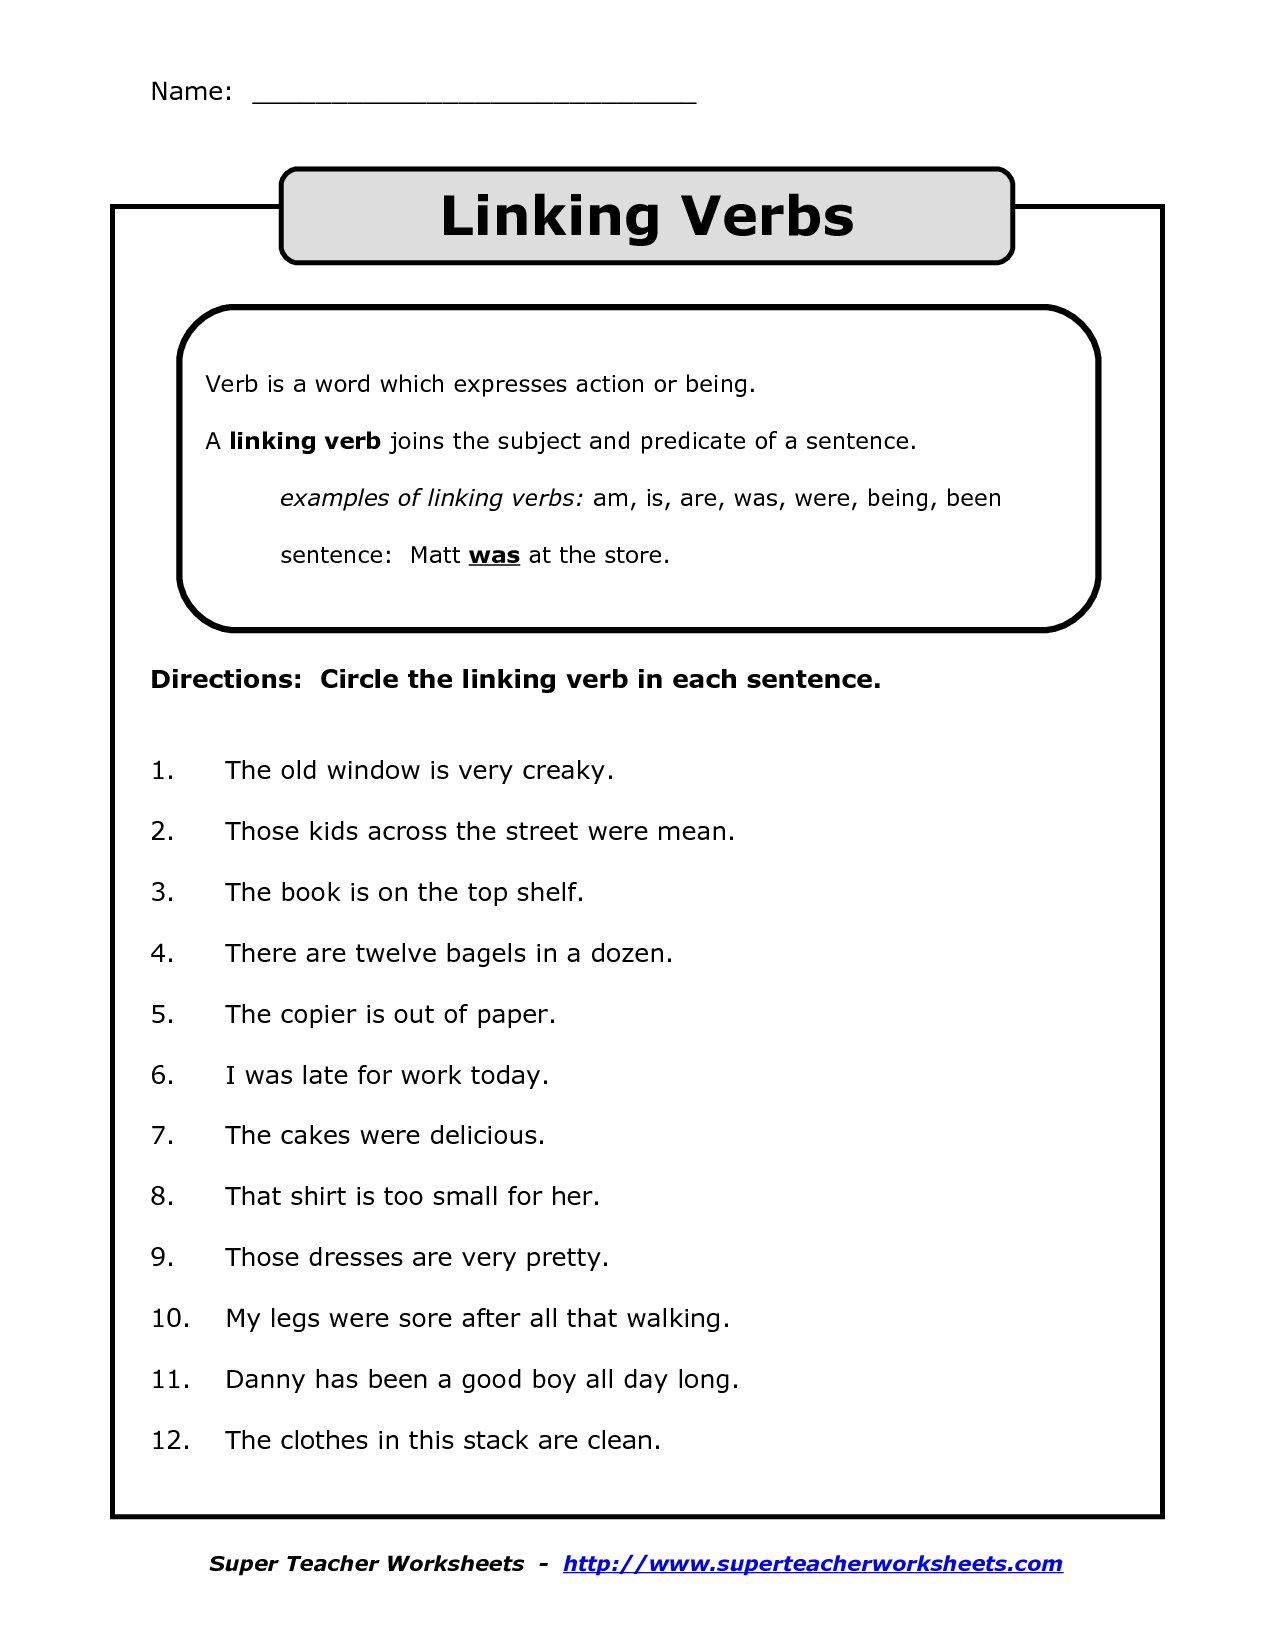 what-is-a-linking-verb-linking-verbs-list-with-useful-examples-7esl-linking-verbs-linking